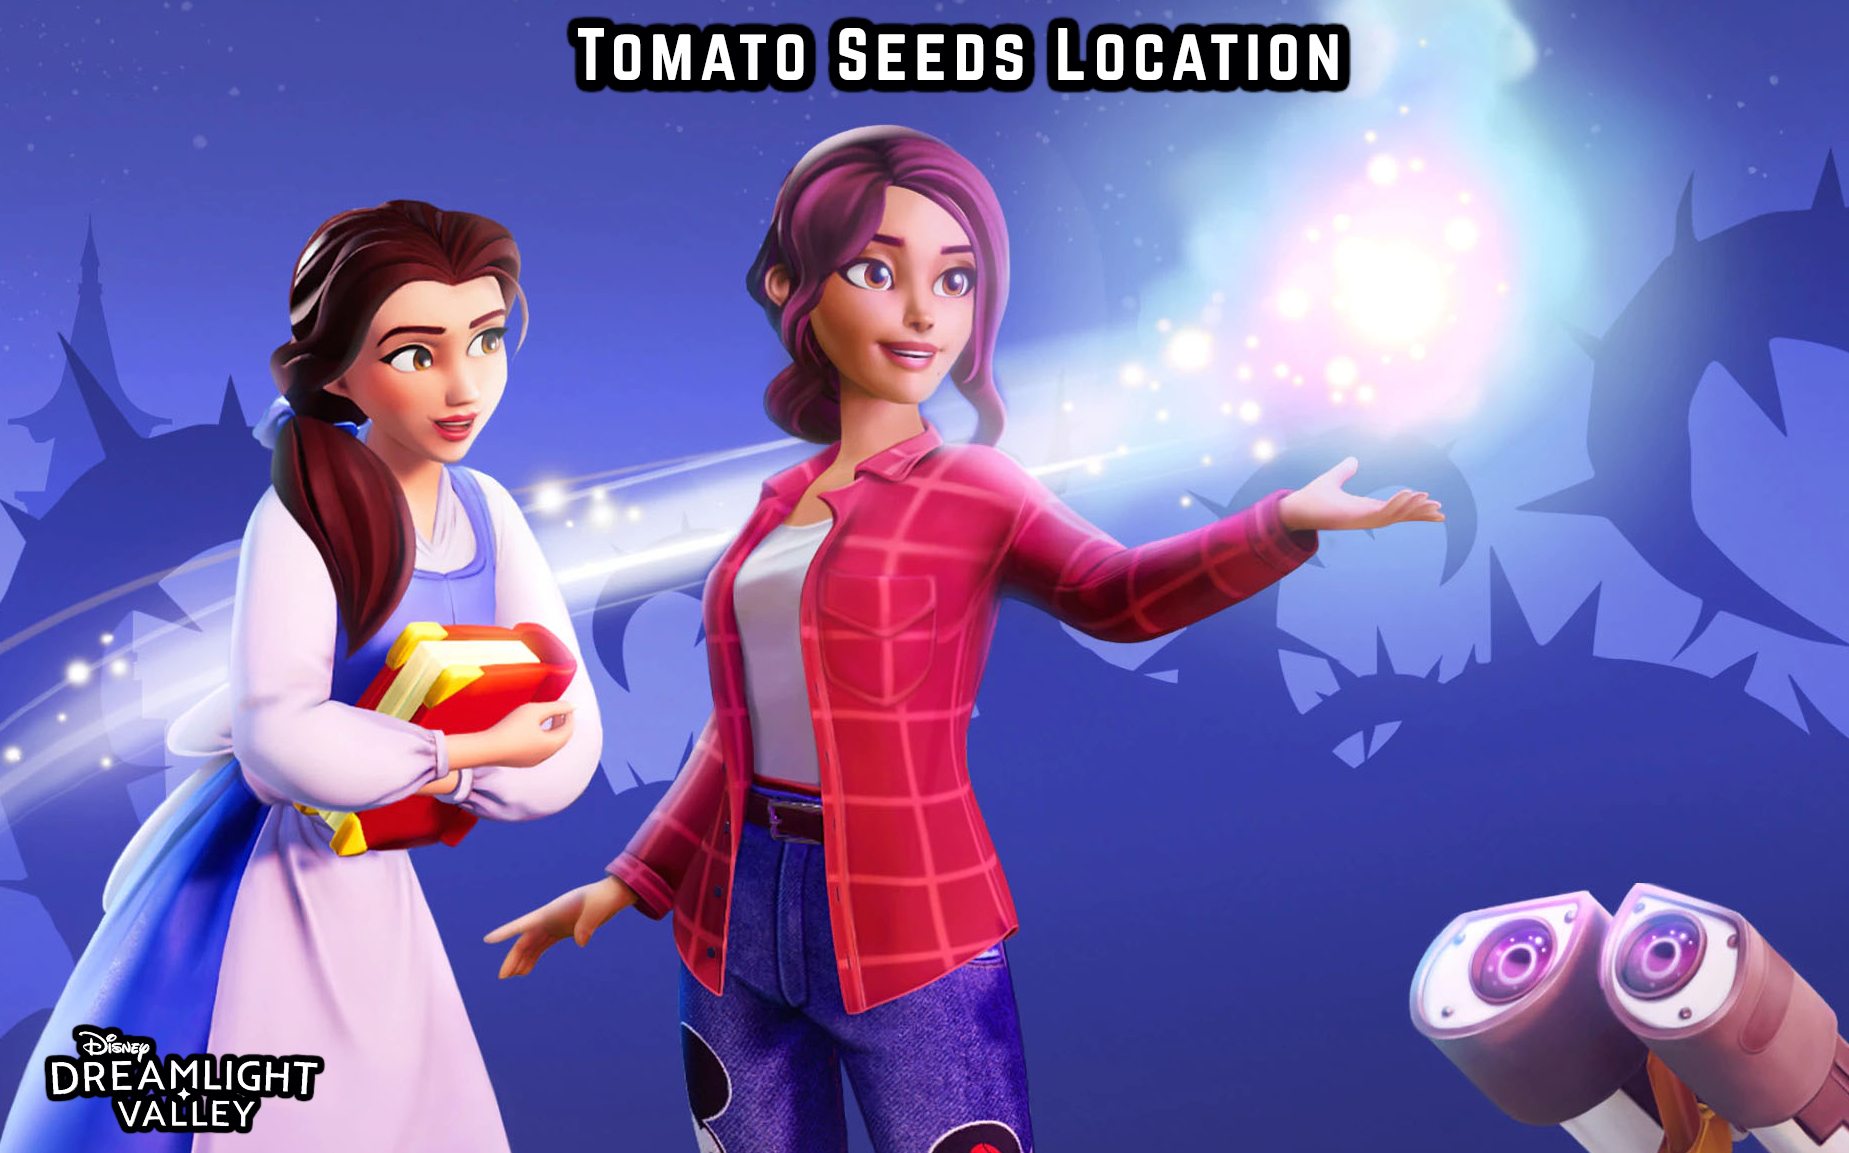 You are currently viewing Tomato Seeds Location In Disney Dreamlight Valley